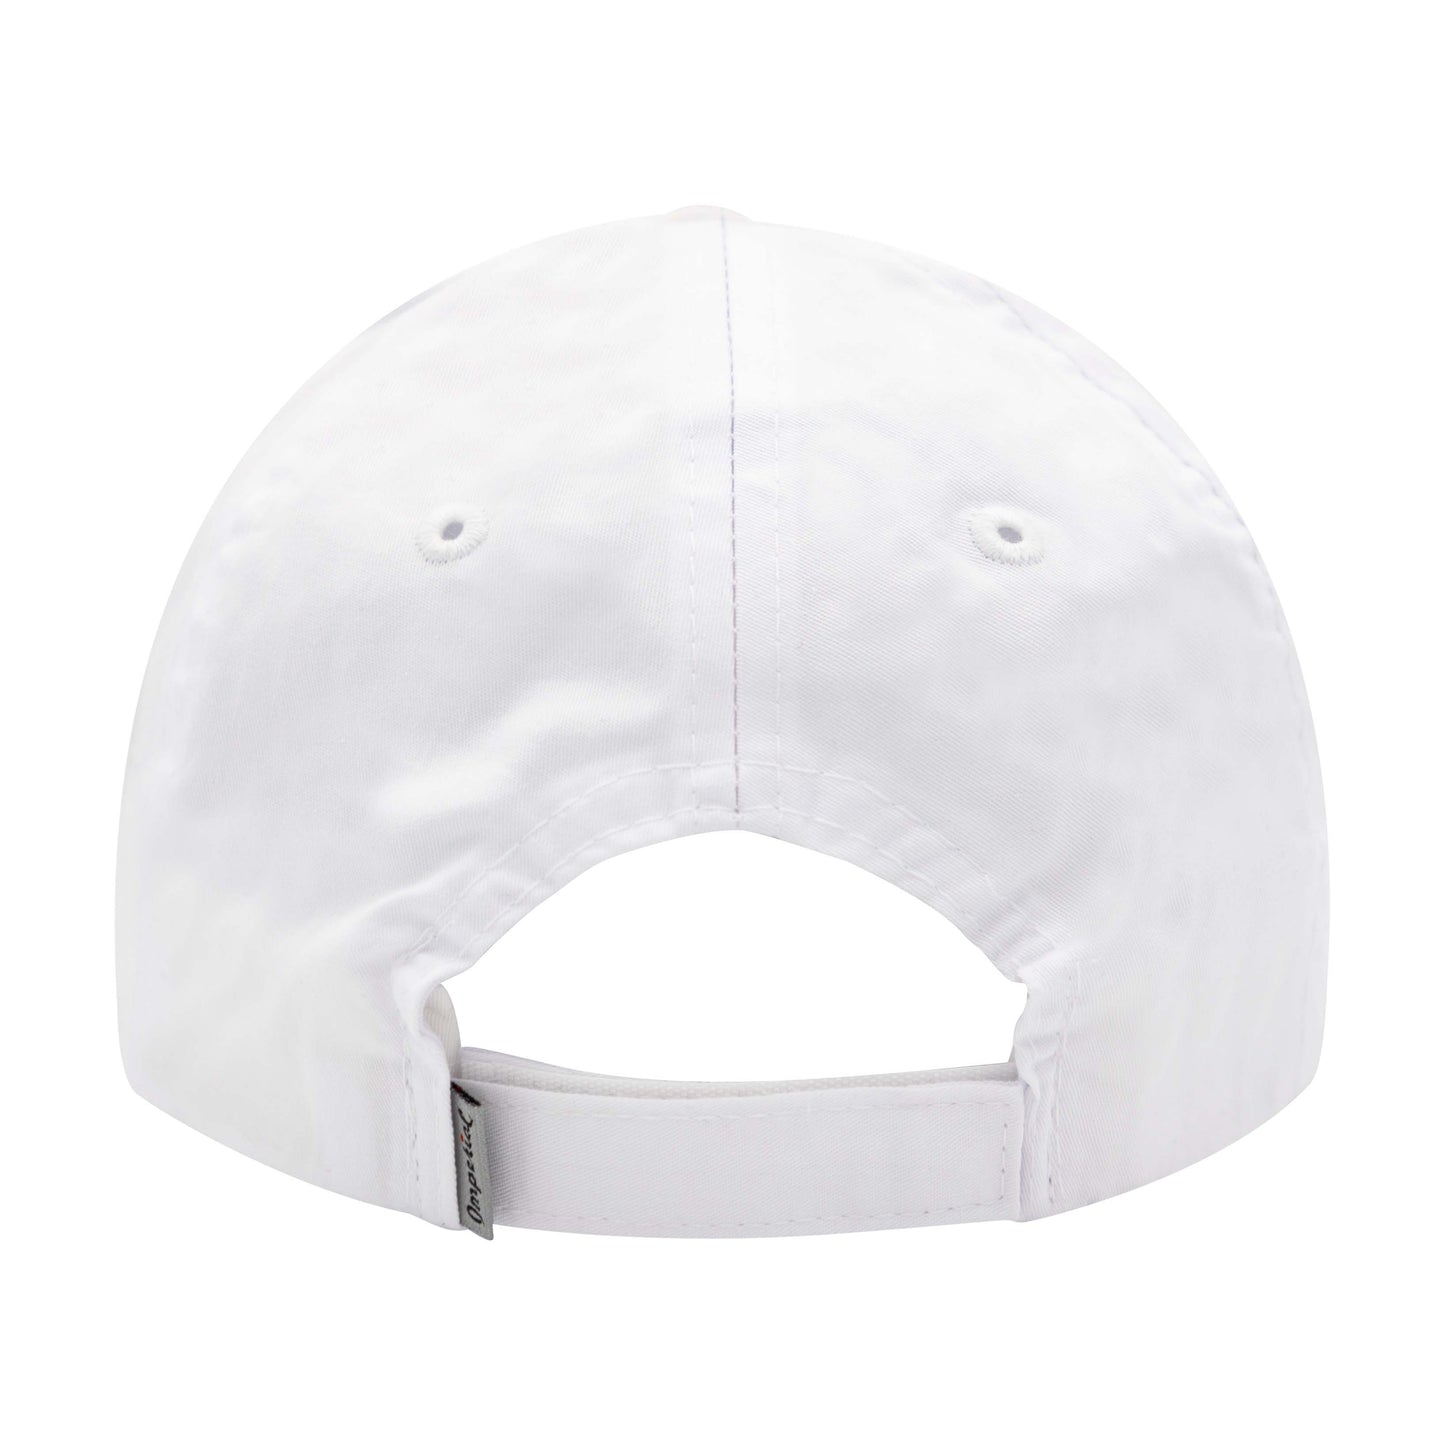 NLU Spring Airline Dad Hat - Imperial Zero| White w/ Green & Yellow Patch